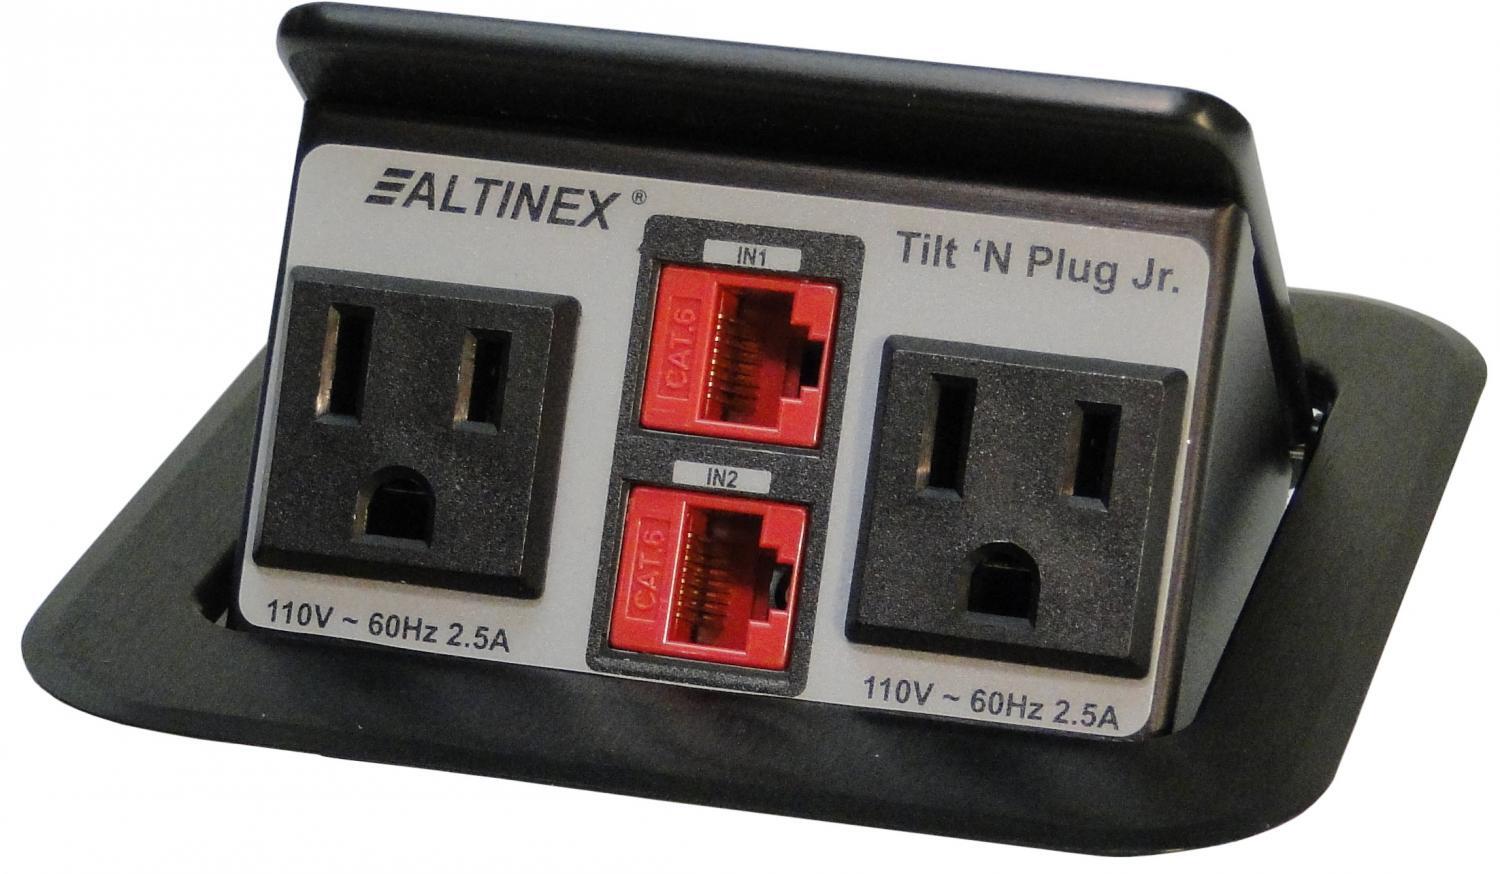 The Altinex Tilt 'N Plug Jr. model TNP151 is one member of compact interconnect solutions designed for installation into a table in a presentation system. The TNP151 provides access to computer network and AC power connections when needed, and hides them when not.